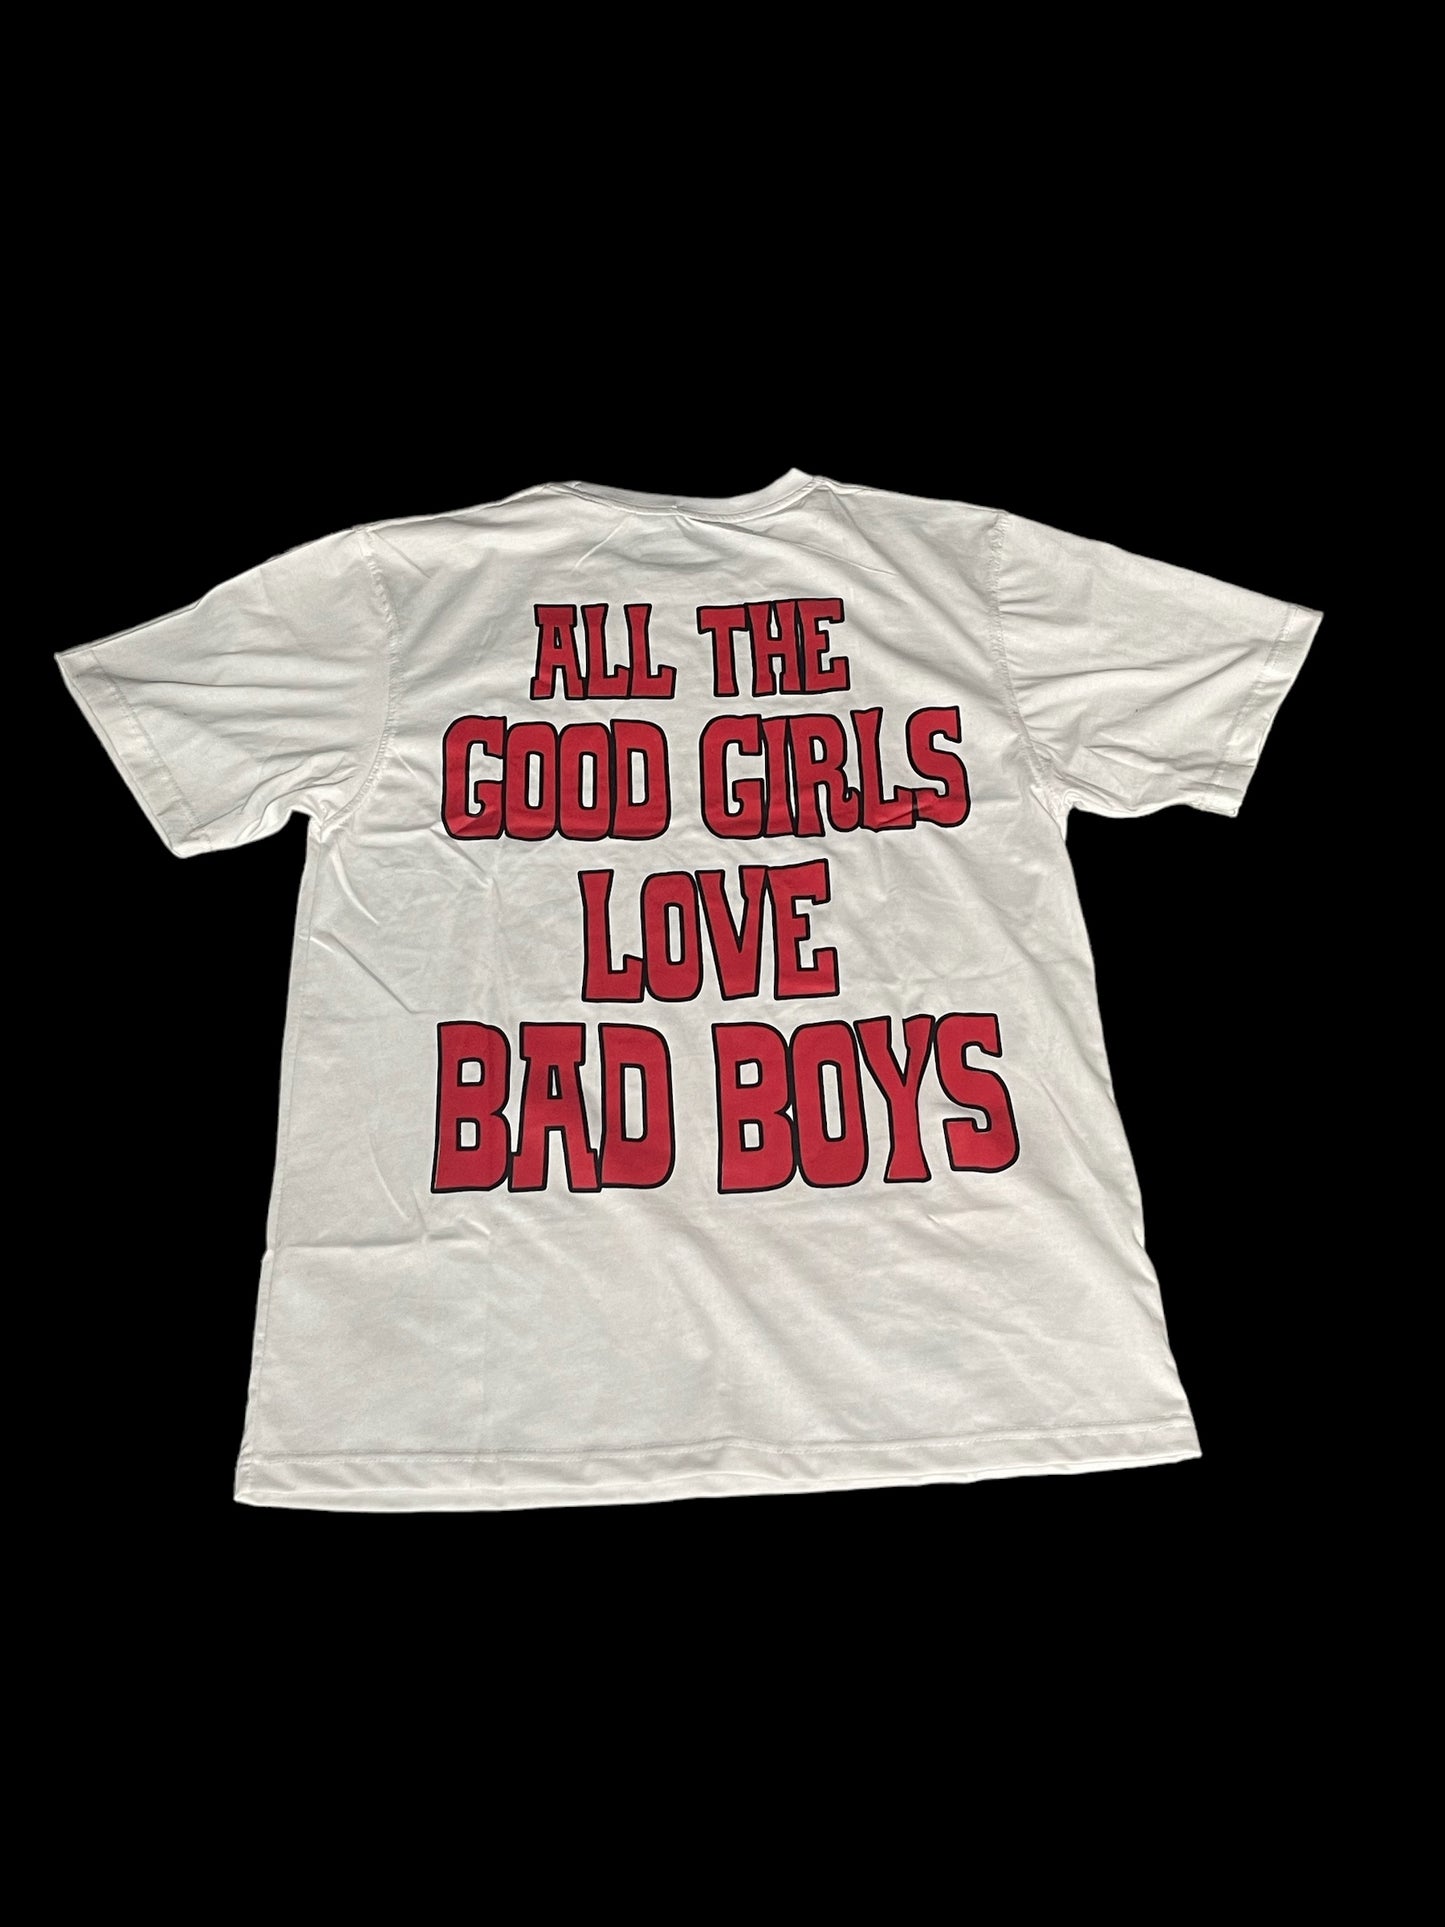 Cant Resist "Good girls" Tee